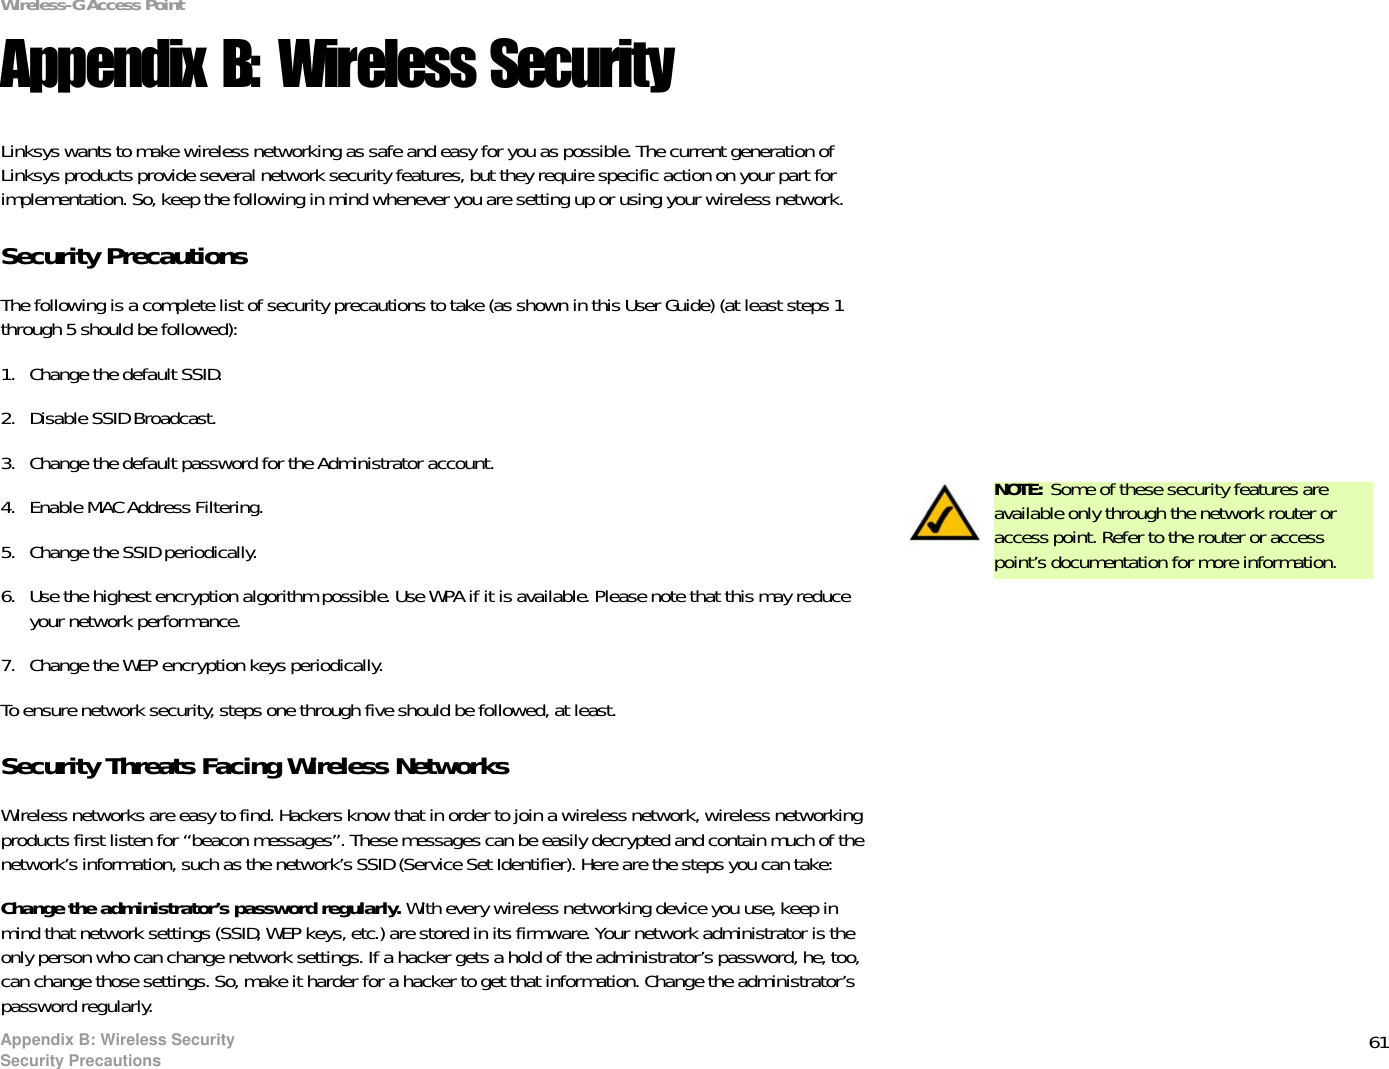 61Appendix B: Wireless SecuritySecurity PrecautionsWireless-G Access PointAppendix B: Wireless SecurityLinksys wants to make wireless networking as safe and easy for you as possible. The current generation of Linksys products provide several network security features, but they require specific action on your part for implementation. So, keep the following in mind whenever you are setting up or using your wireless network.Security PrecautionsThe following is a complete list of security precautions to take (as shown in this User Guide) (at least steps 1 through 5 should be followed):1. Change the default SSID. 2. Disable SSID Broadcast. 3. Change the default password for the Administrator account. 4. Enable MAC Address Filtering. 5. Change the SSID periodically. 6. Use the highest encryption algorithm possible. Use WPA if it is available. Please note that this may reduce your network performance. 7. Change the WEP encryption keys periodically. To ensure network security, steps one through five should be followed, at least.Security Threats Facing Wireless Networks Wireless networks are easy to find. Hackers know that in order to join a wireless network, wireless networking products first listen for “beacon messages”. These messages can be easily decrypted and contain much of the network’s information, such as the network’s SSID (Service Set Identifier). Here are the steps you can take:Change the administrator’s password regularly. With every wireless networking device you use, keep in mind that network settings (SSID, WEP keys, etc.) are stored in its firmware. Your network administrator is the only person who can change network settings. If a hacker gets a hold of the administrator’s password, he, too, can change those settings. So, make it harder for a hacker to get that information. Change the administrator’s password regularly.NOTE: Some of these security features are available only through the network router or access point. Refer to the router or access point’s documentation for more information.